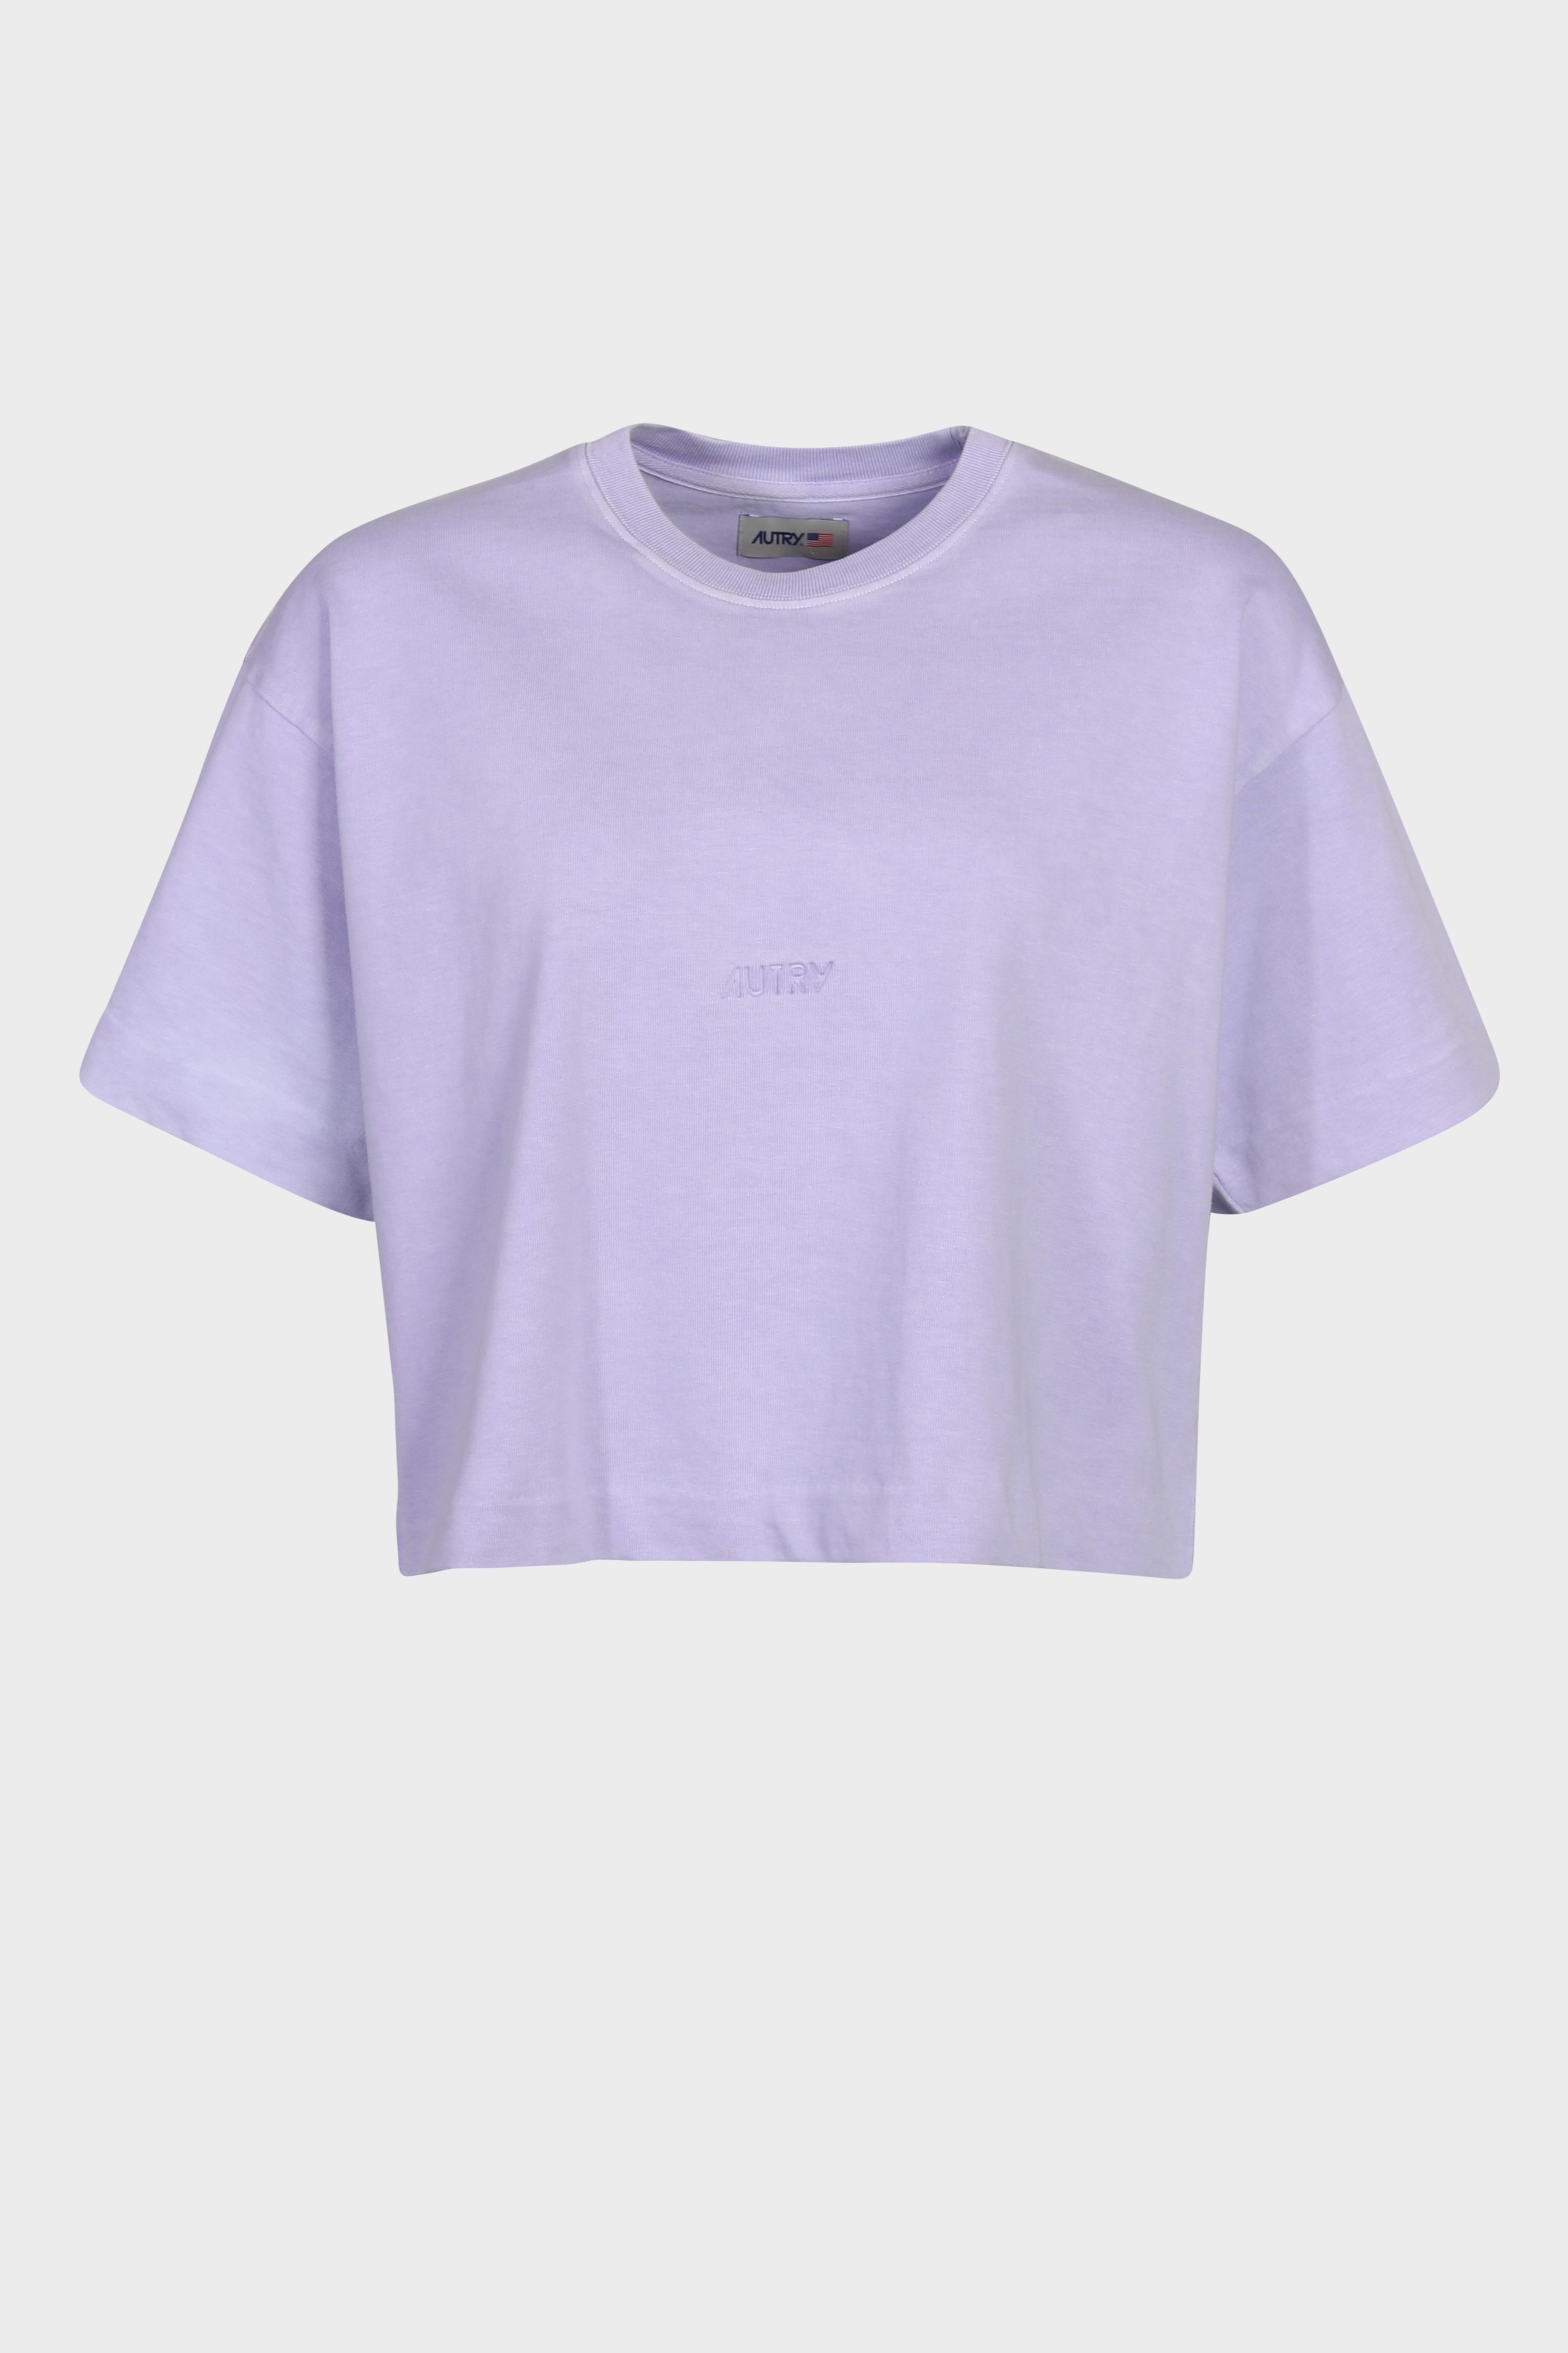 AUTRY ACTION PEOPLE Apparel T-Shirt in Lilac M